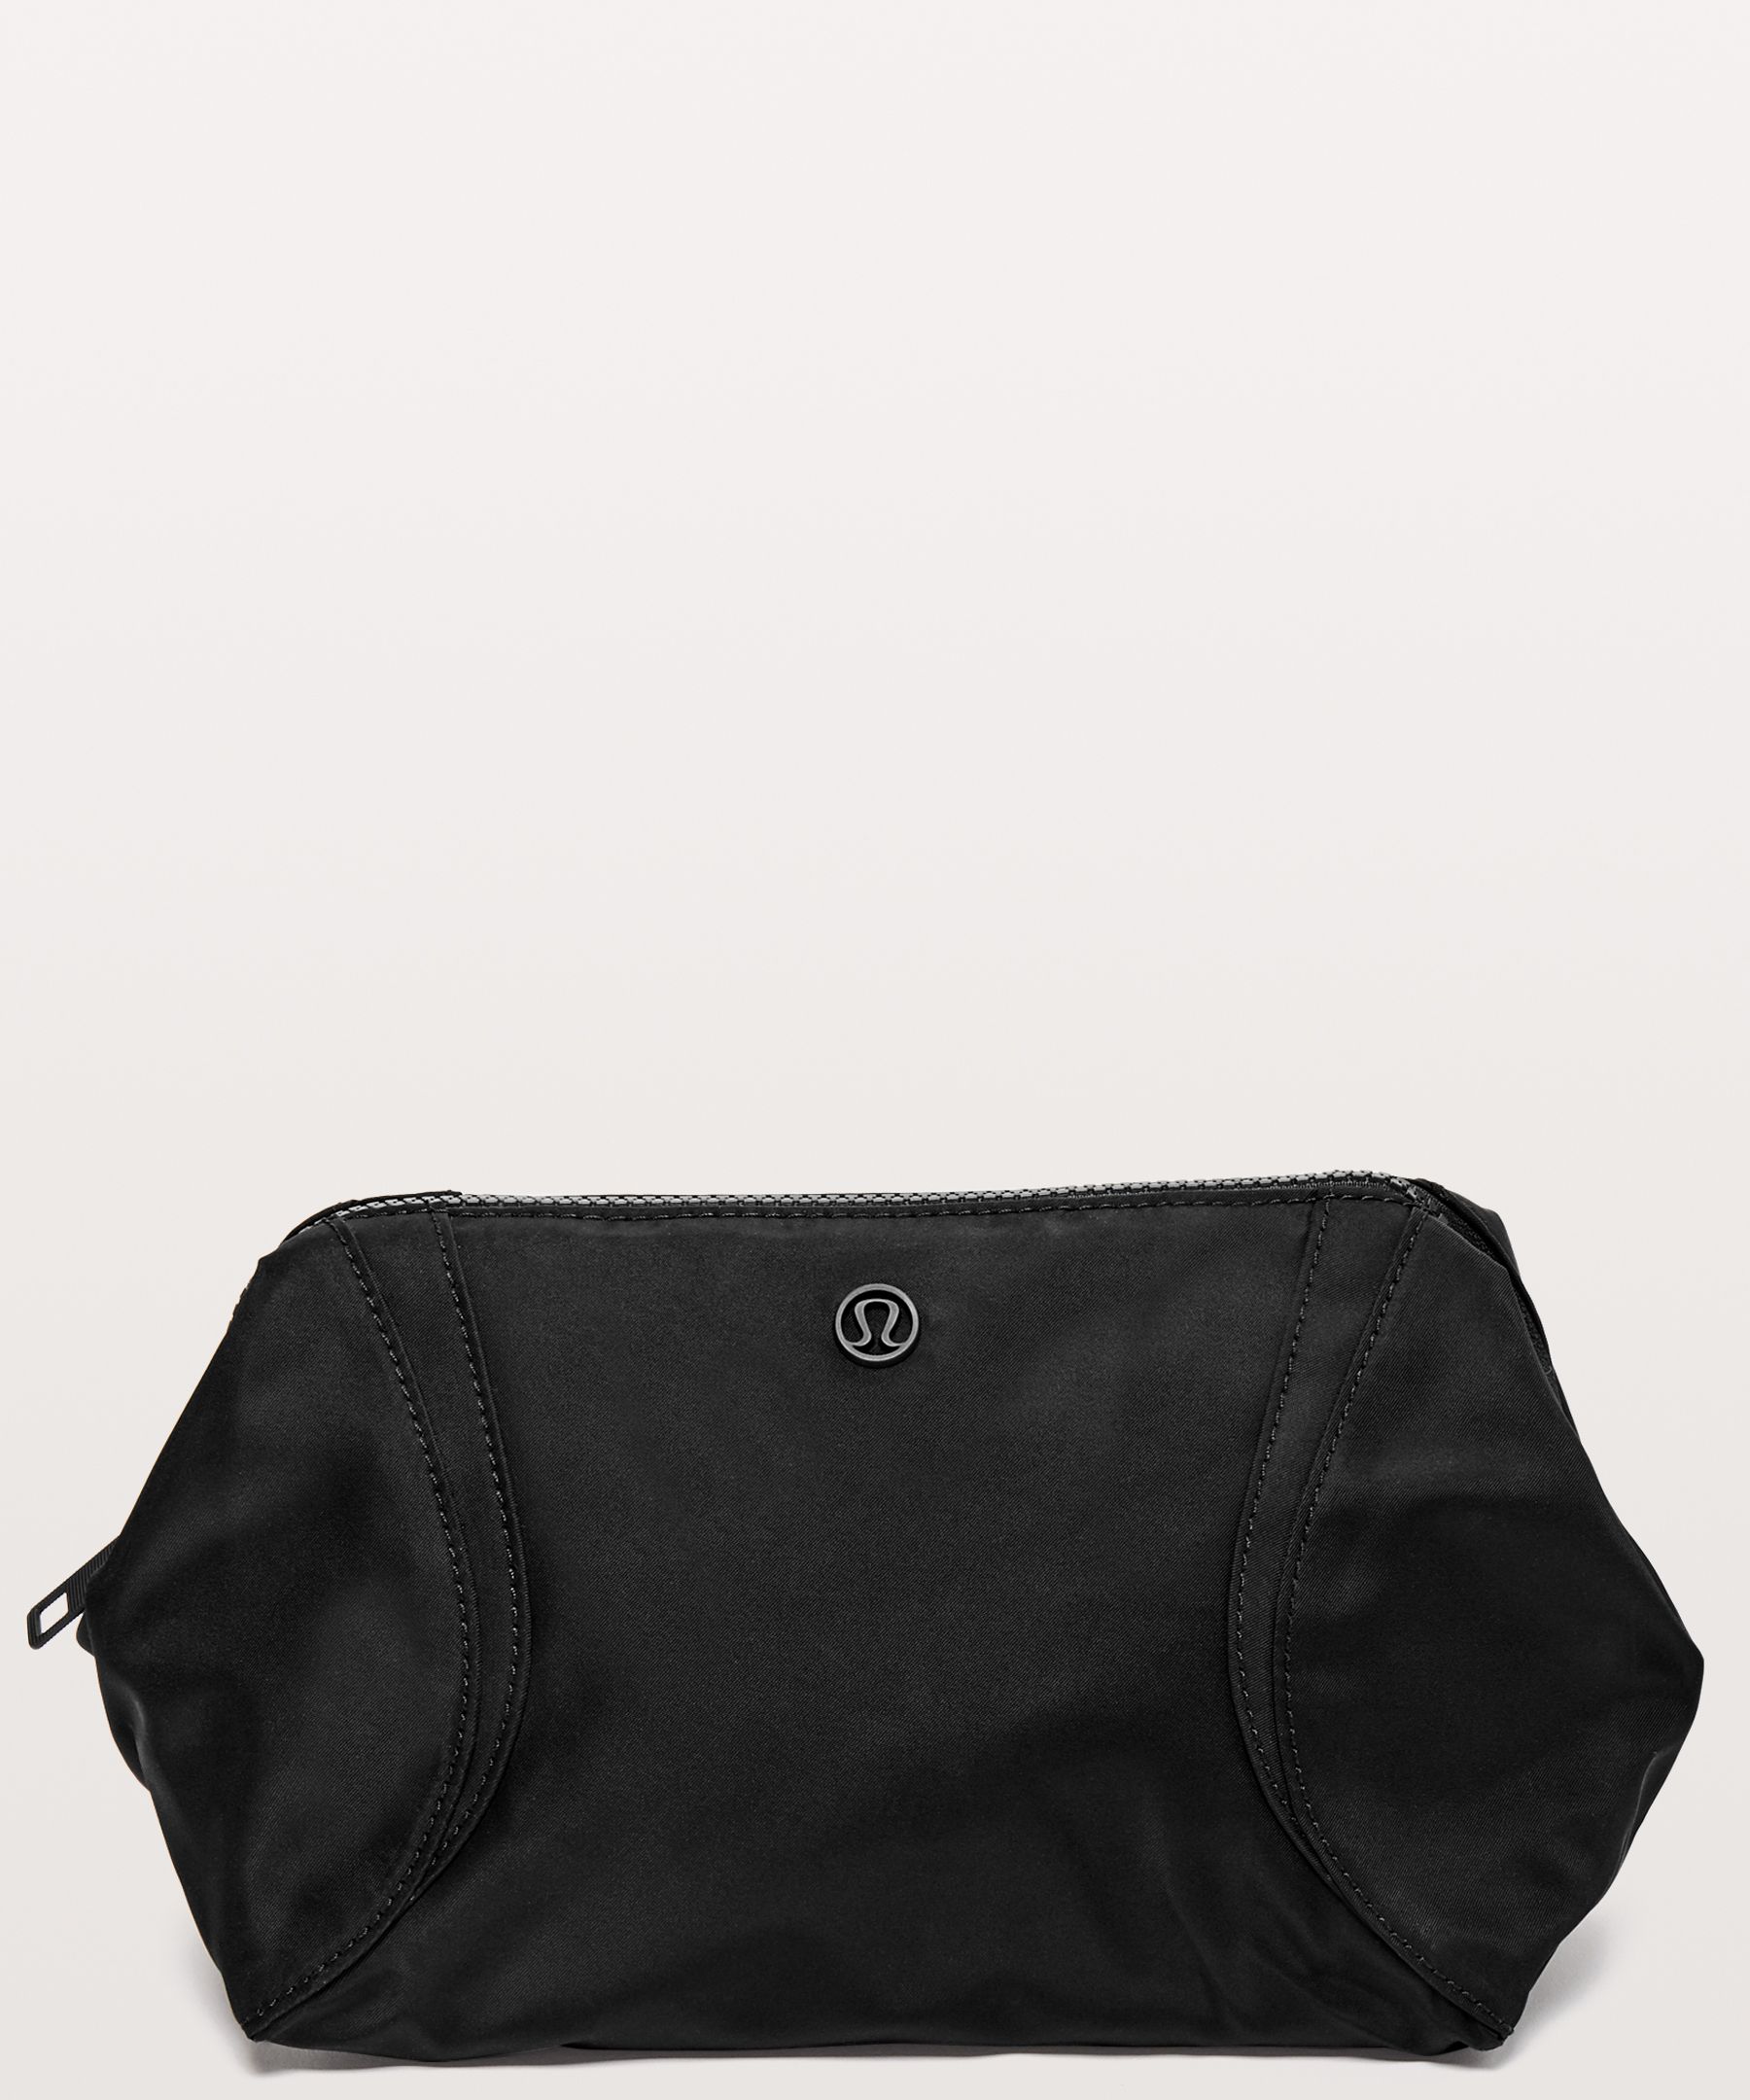 Out of Range Kit | Women's Bags 